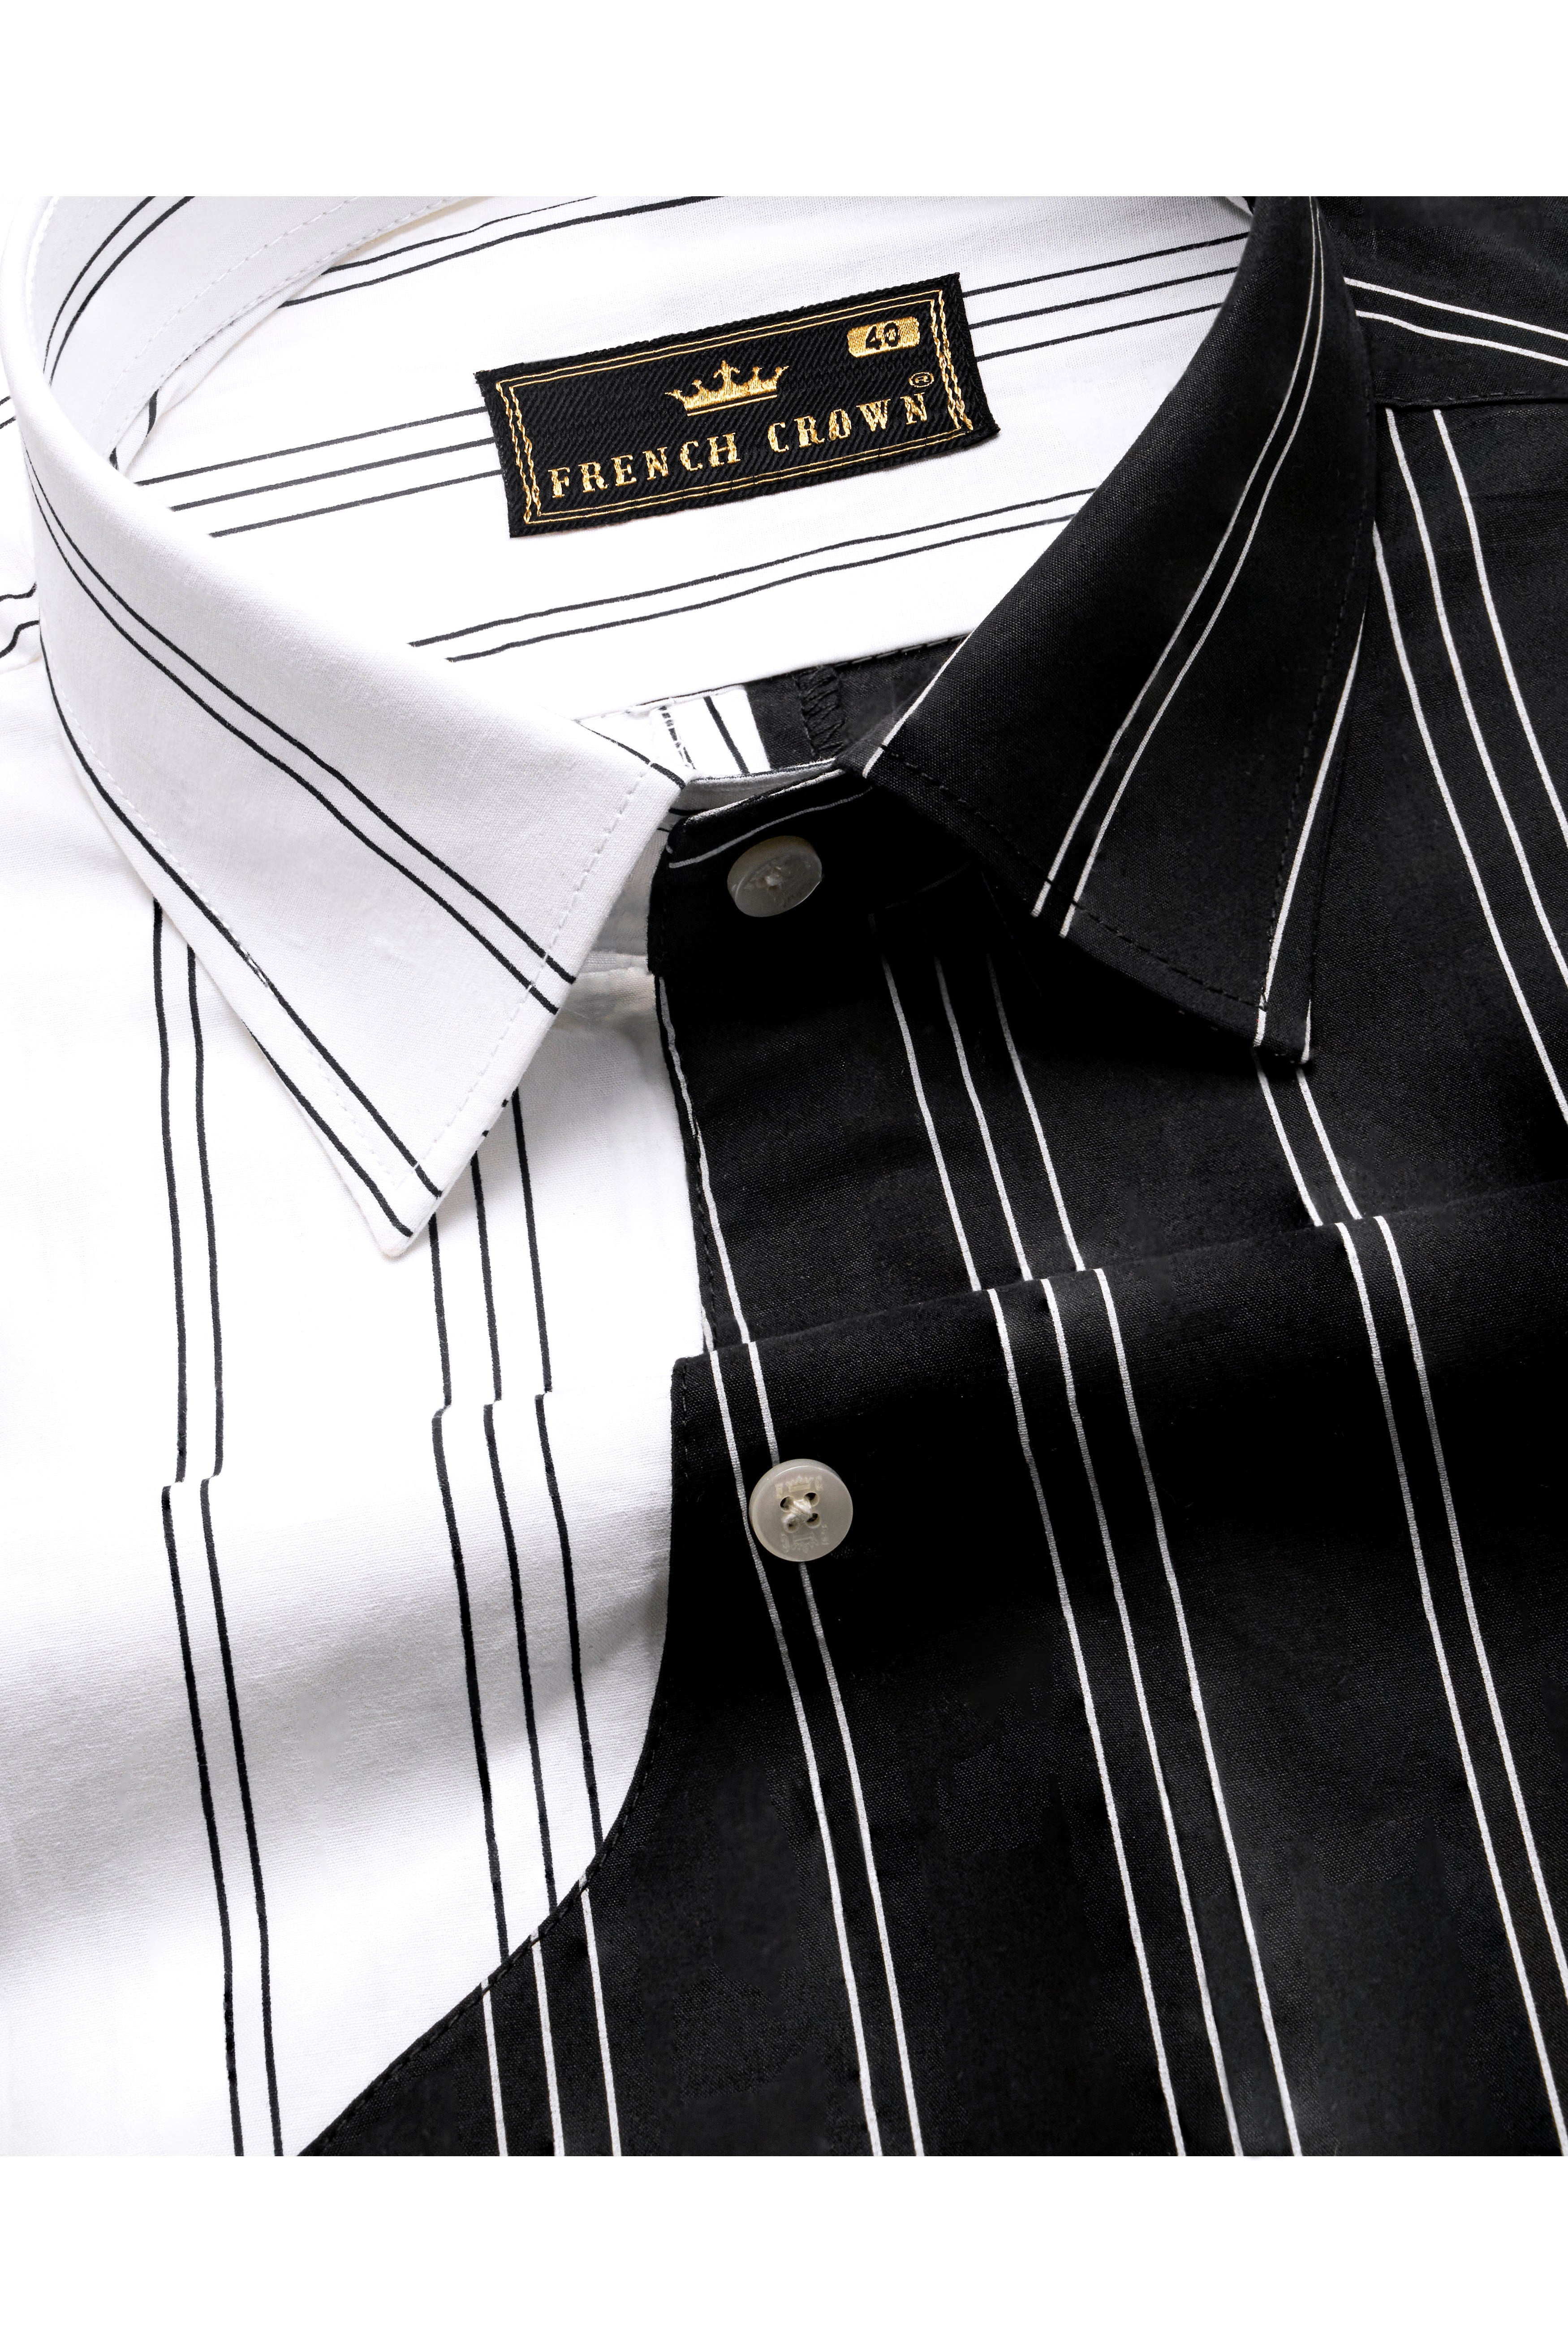 Half Withe with Half Black Pin Striped Embellished with Embroidered Work Premium Cotton Designer Shirt